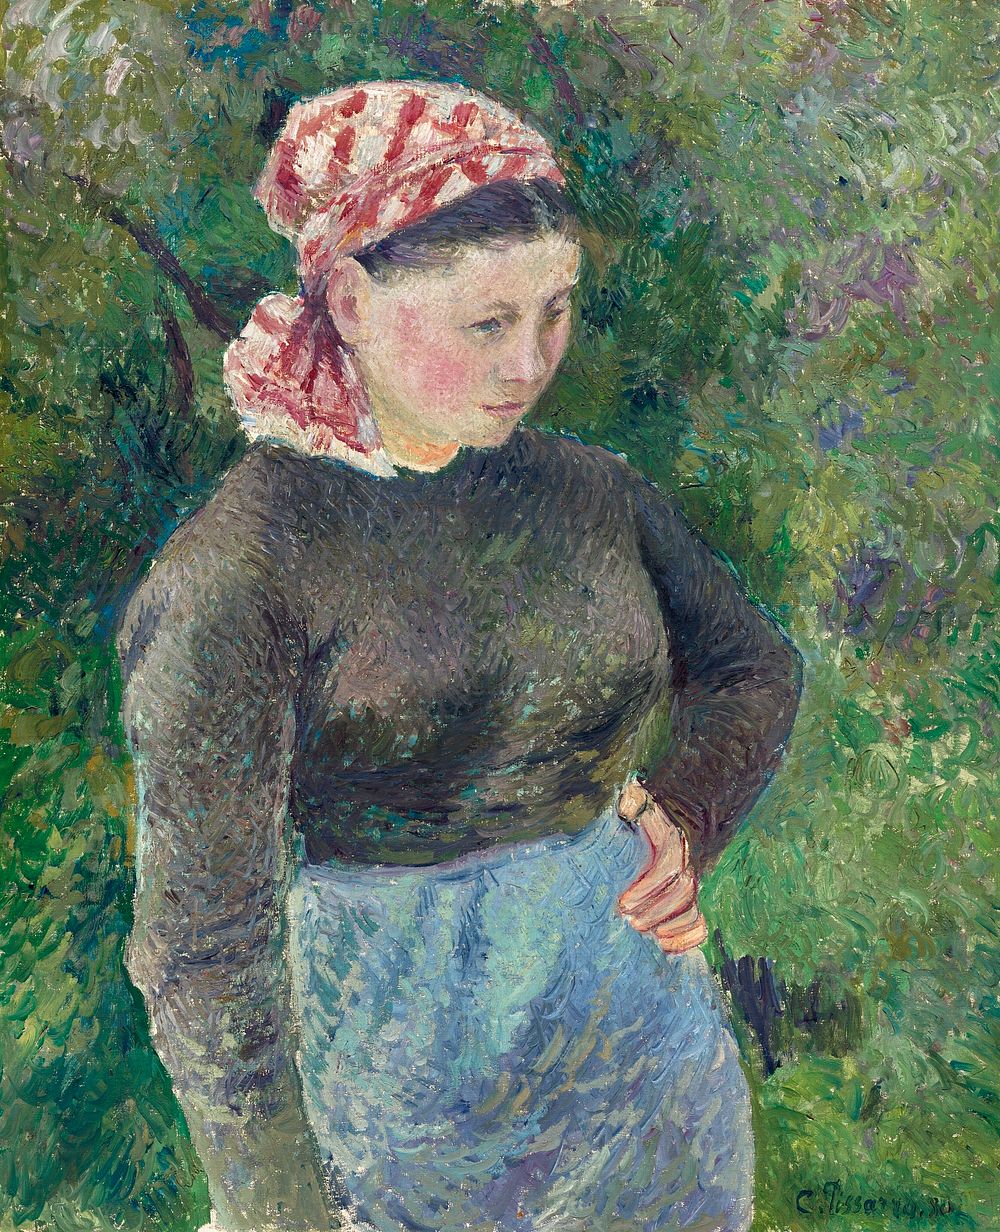 Peasant Woman (1880) by Camille Pissarro. Original from The National Gallery of Art. Digitally enhanced by rawpixel.